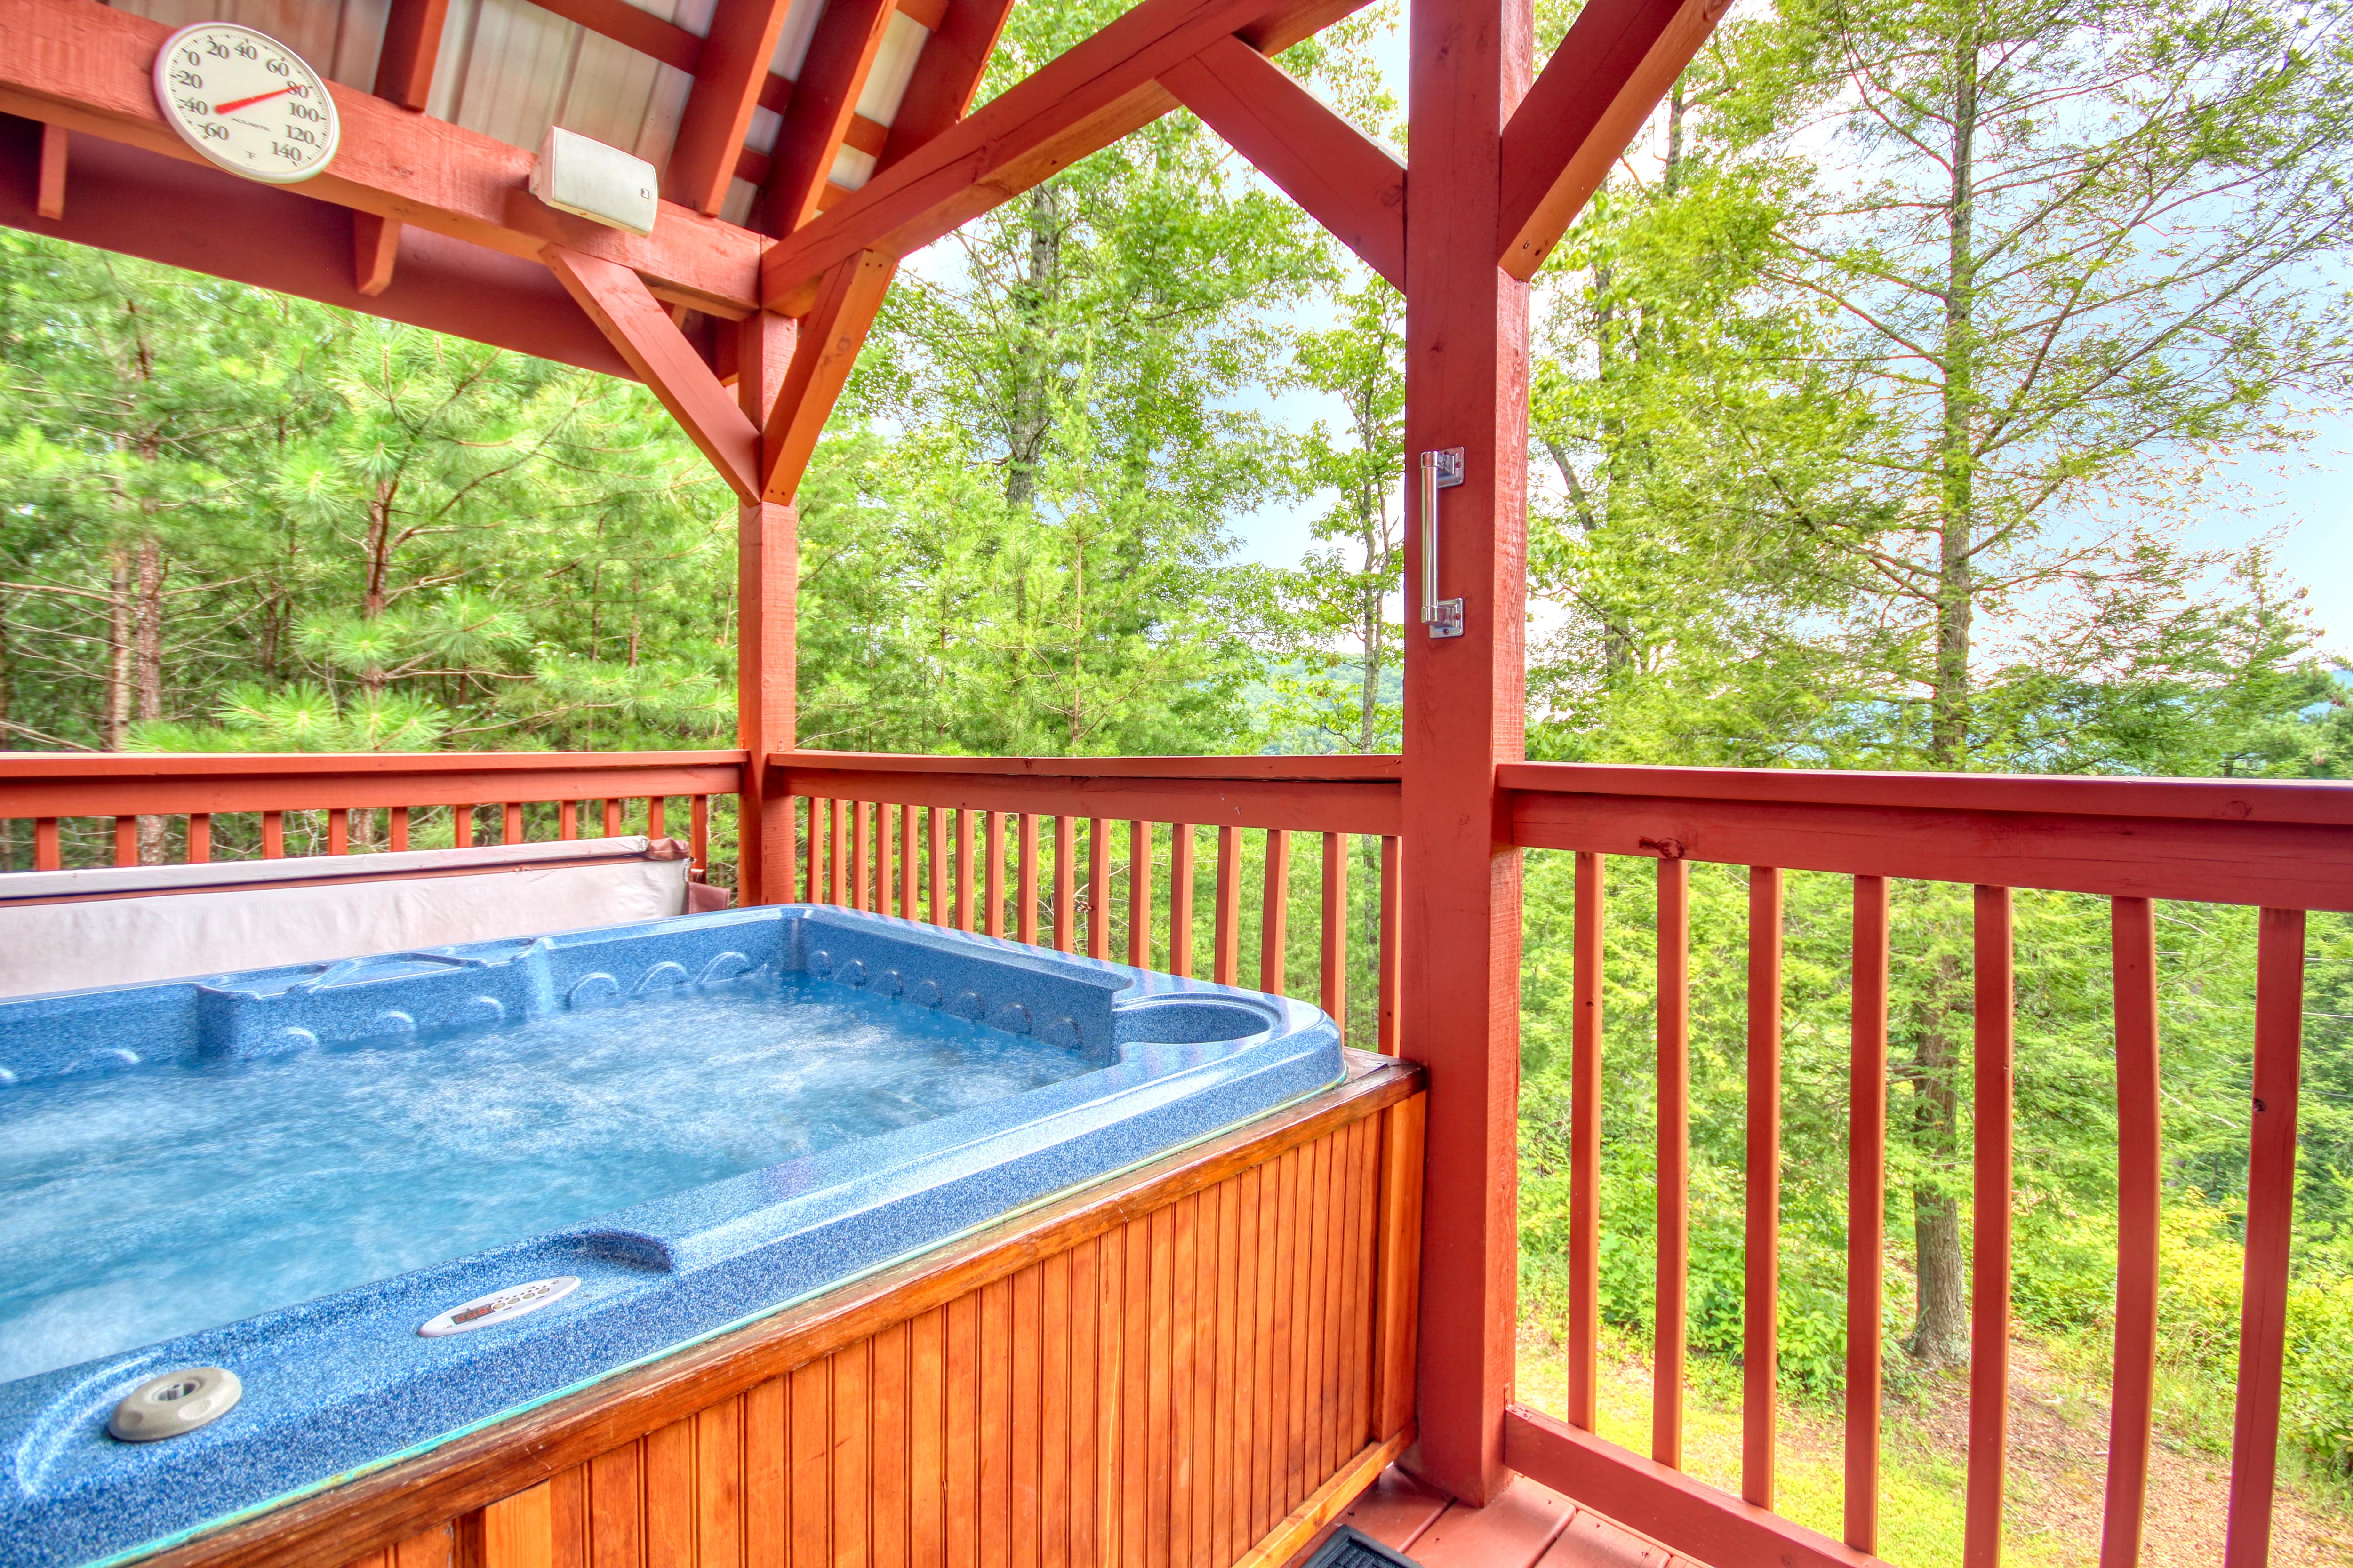 Relax in your hot tub here in the Smoky Mountains!